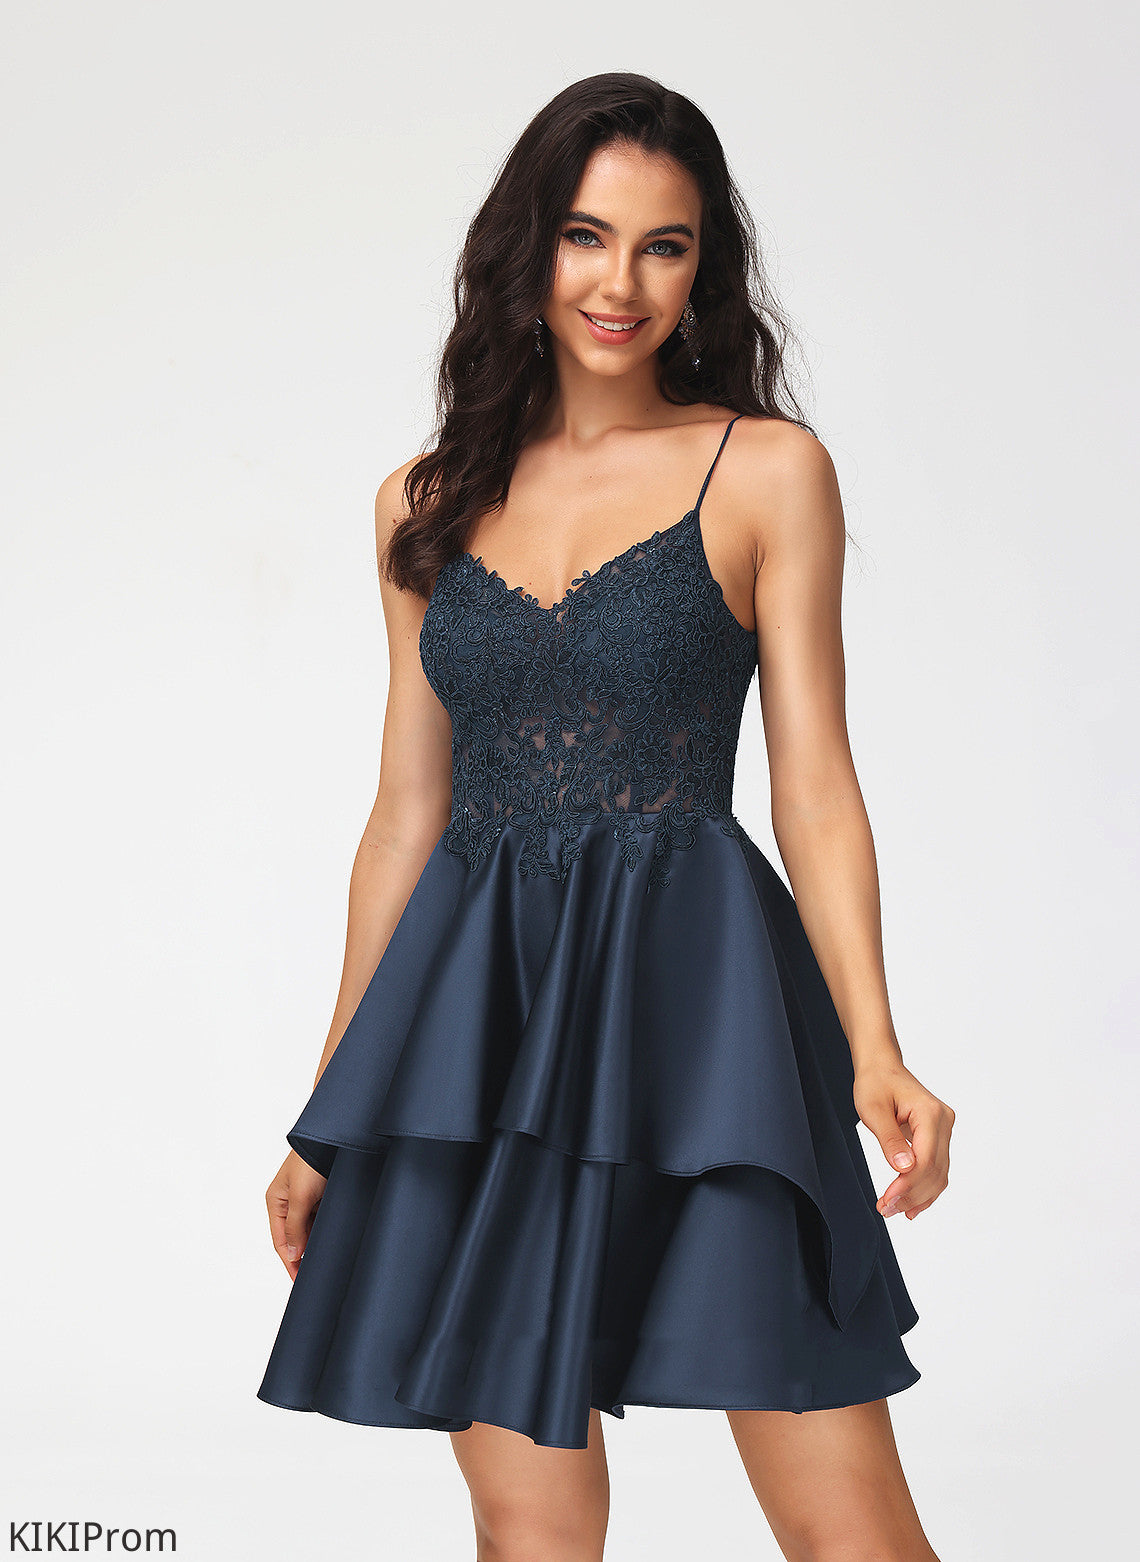 Short/Mini A-Line Homecoming Dresses Lace Dress Satin V-neck Arely Homecoming With